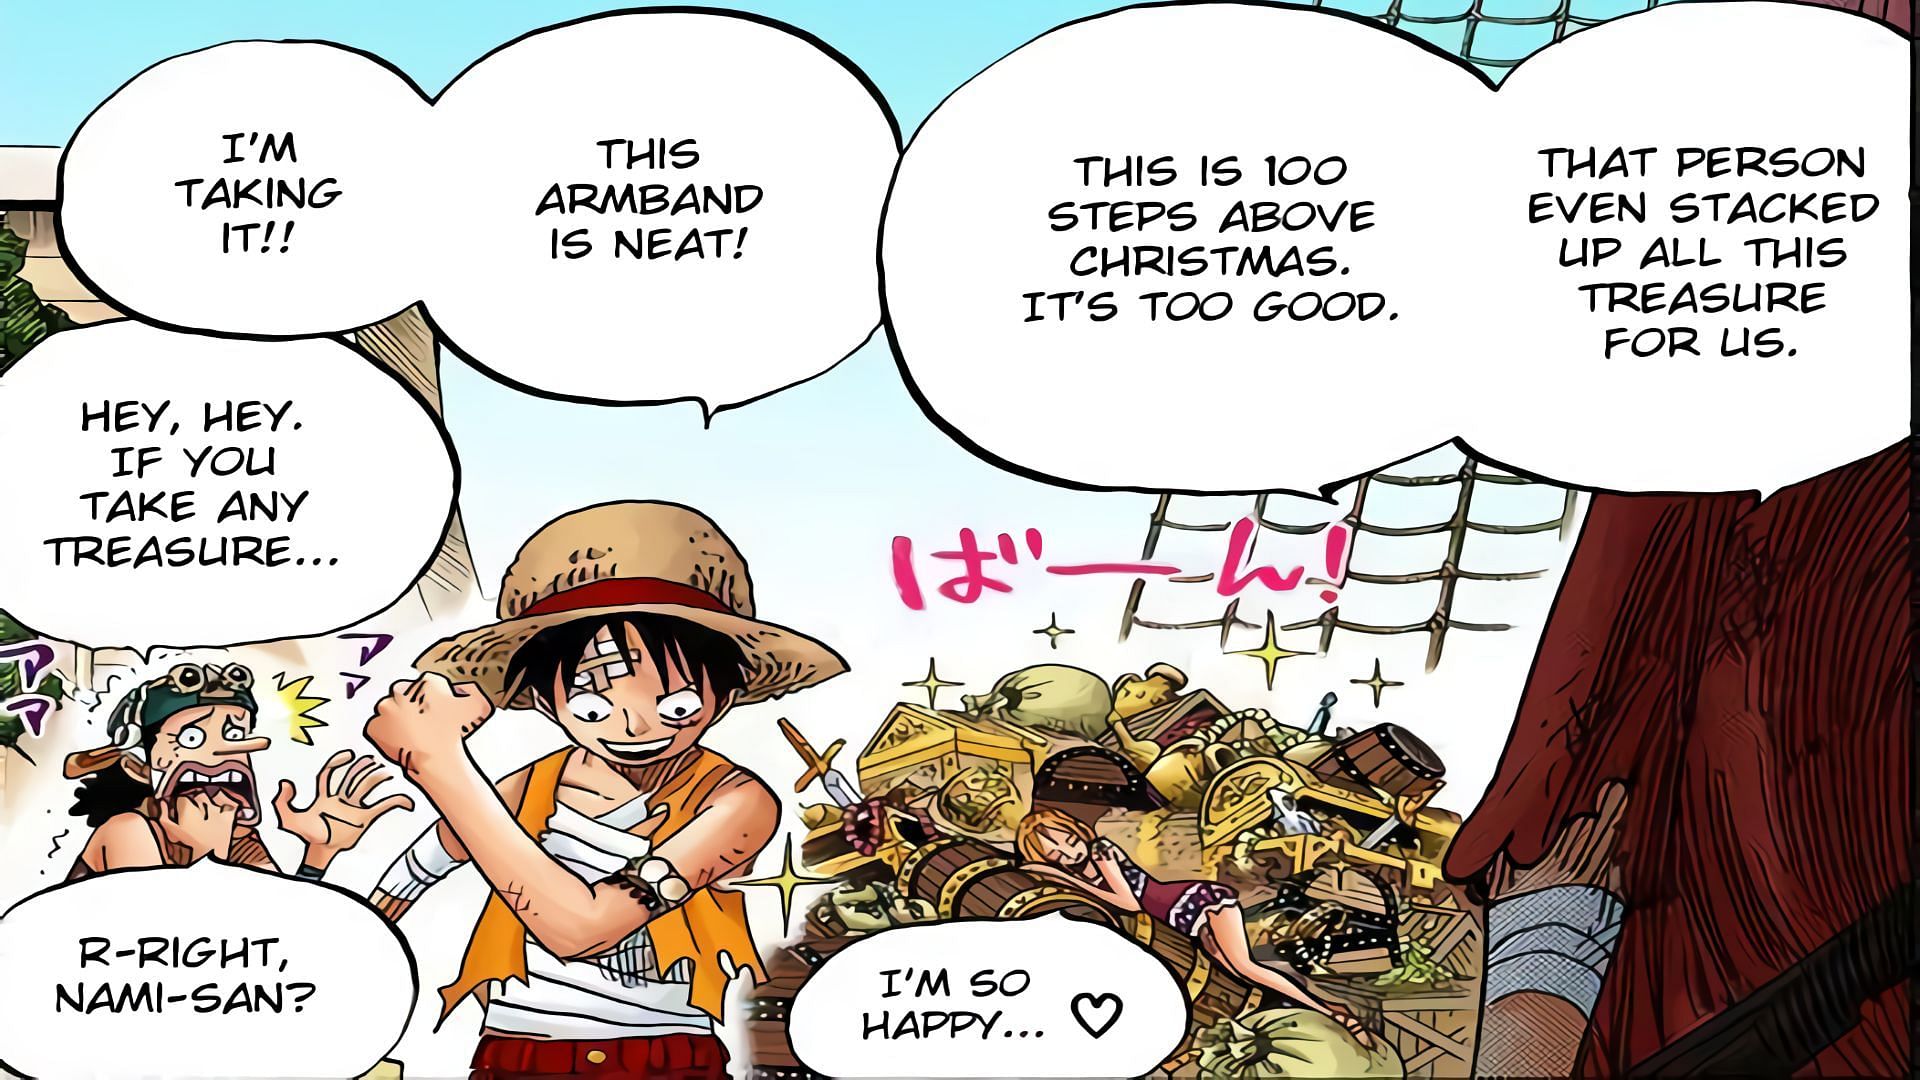 Will you pull off a daring escape as a Straw Hat pirate, or bring orde, ONE PIECE